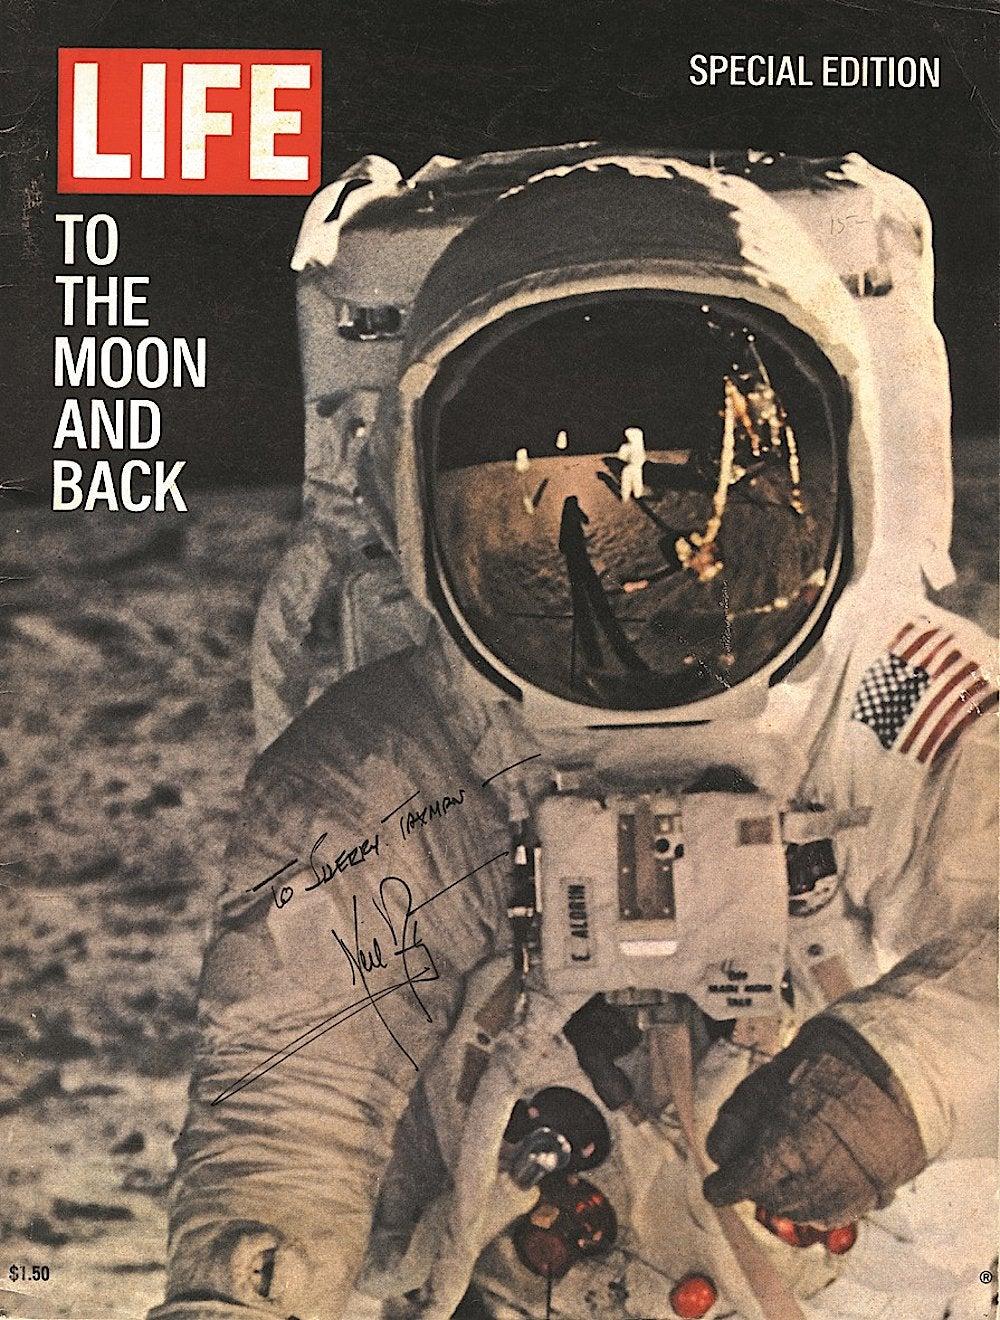 A Life magazine cover signed by Apollo 11 astronaut and first man on the moon Neil Armstrong
In 1969, Apollo 11 commander Neil Armstrong became the first person to set foot on the Moon. 

He was awarded a Congressional Space Medal of Honor for